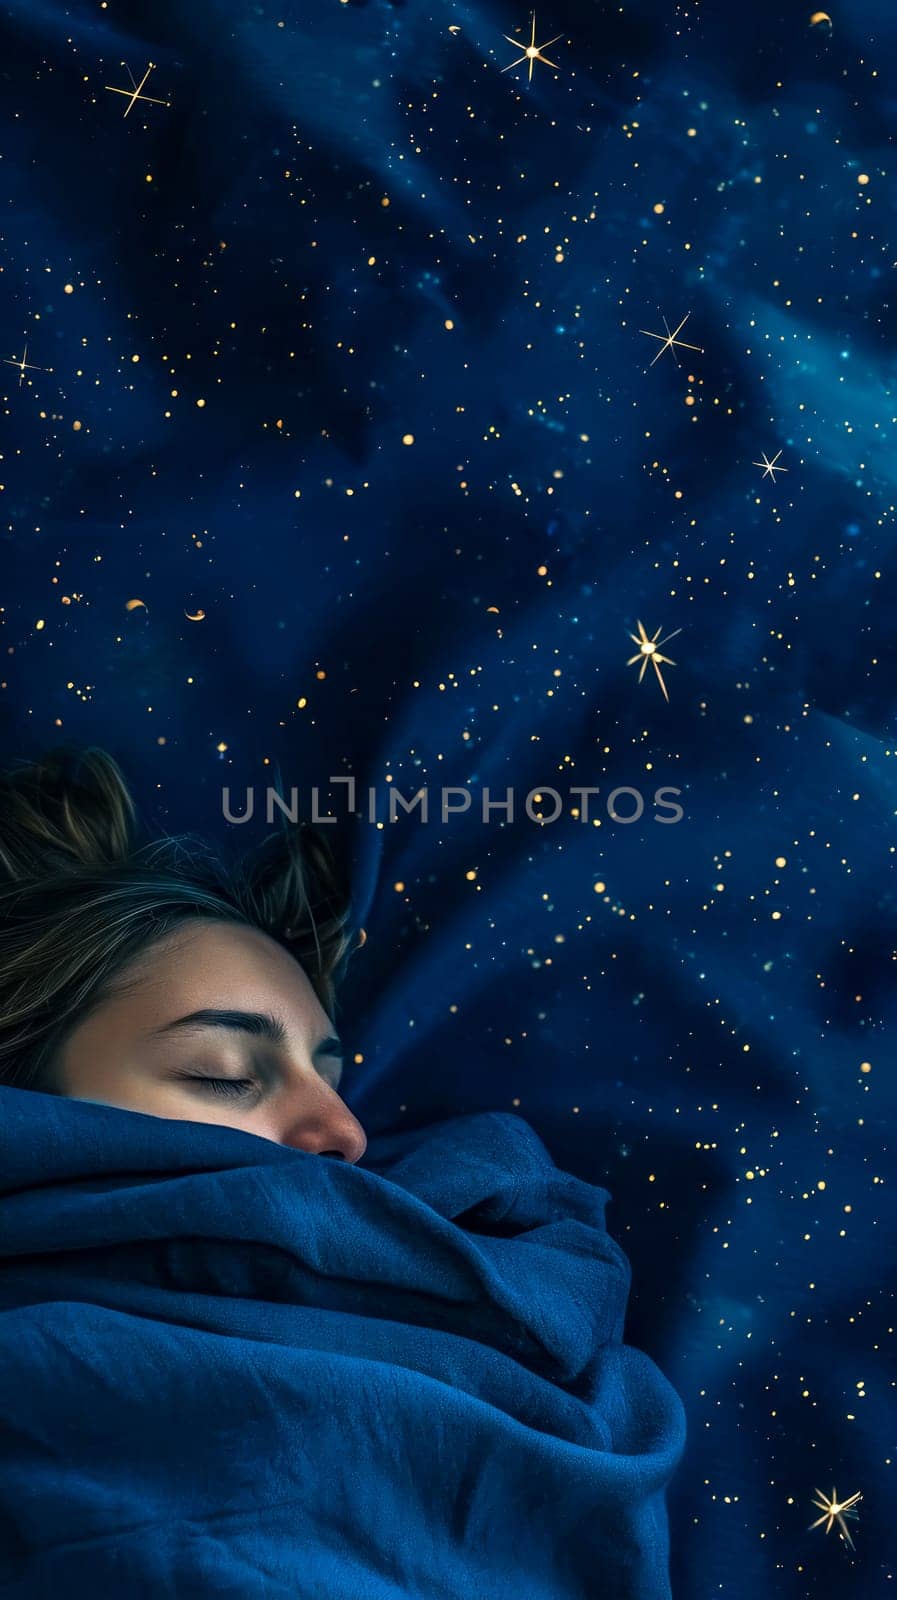 young woman sleeping comfortably under a blue blanket, passing through a star-studded night sky, giving the impression of being enveloped in space by Edophoto